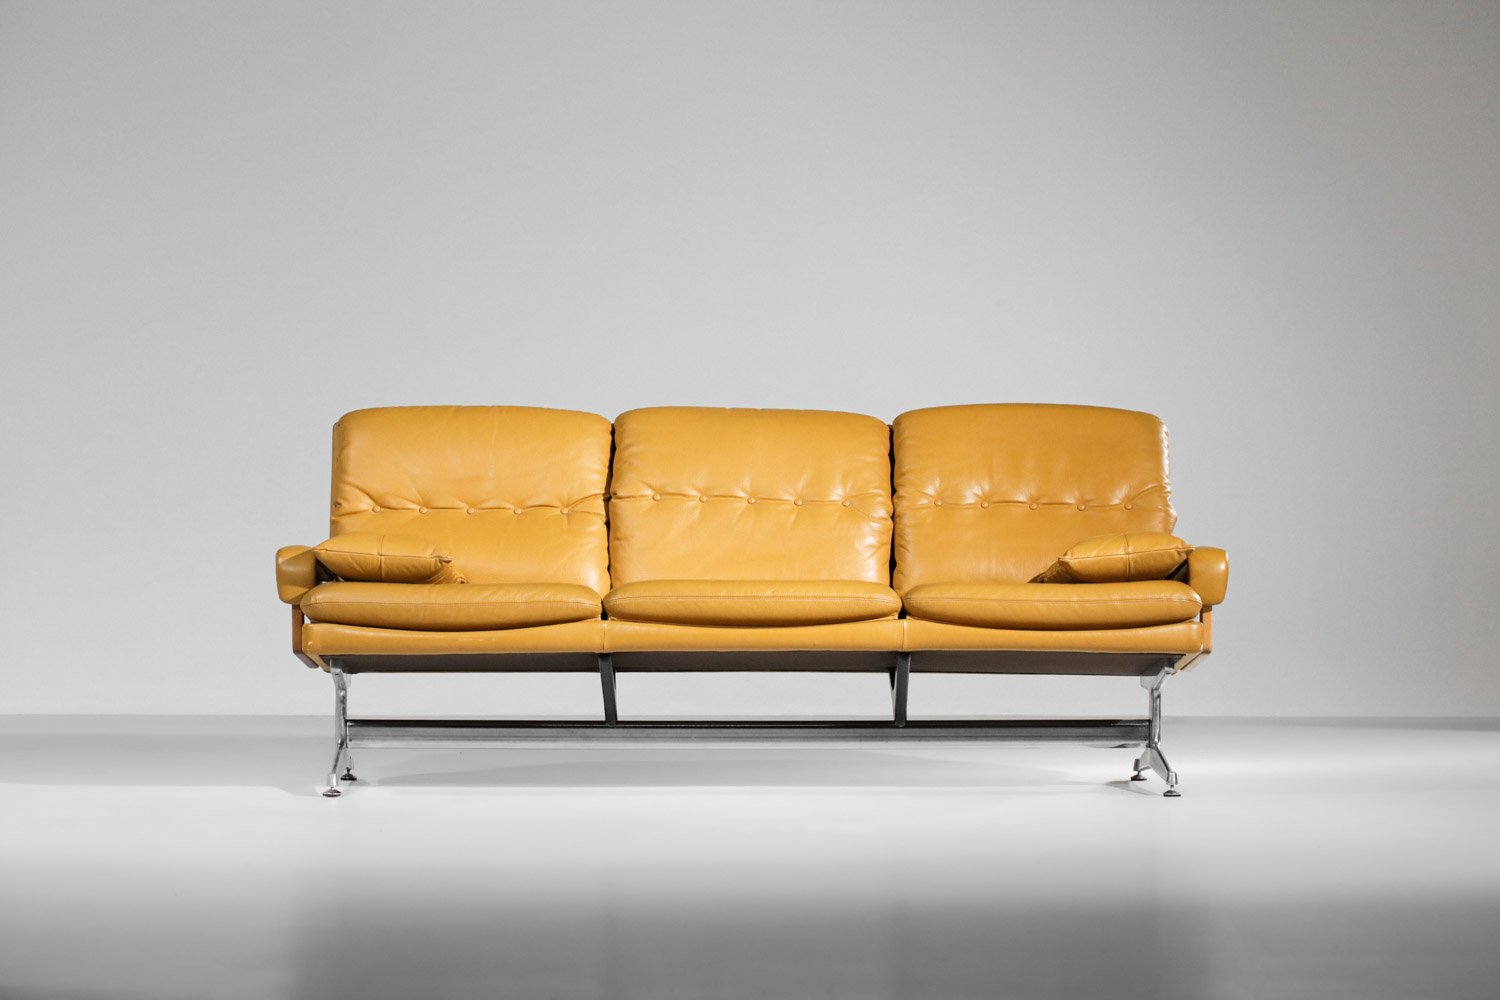 Canapé cuir jaune style Charles et Ray Eames - sofa banquette germany - H06